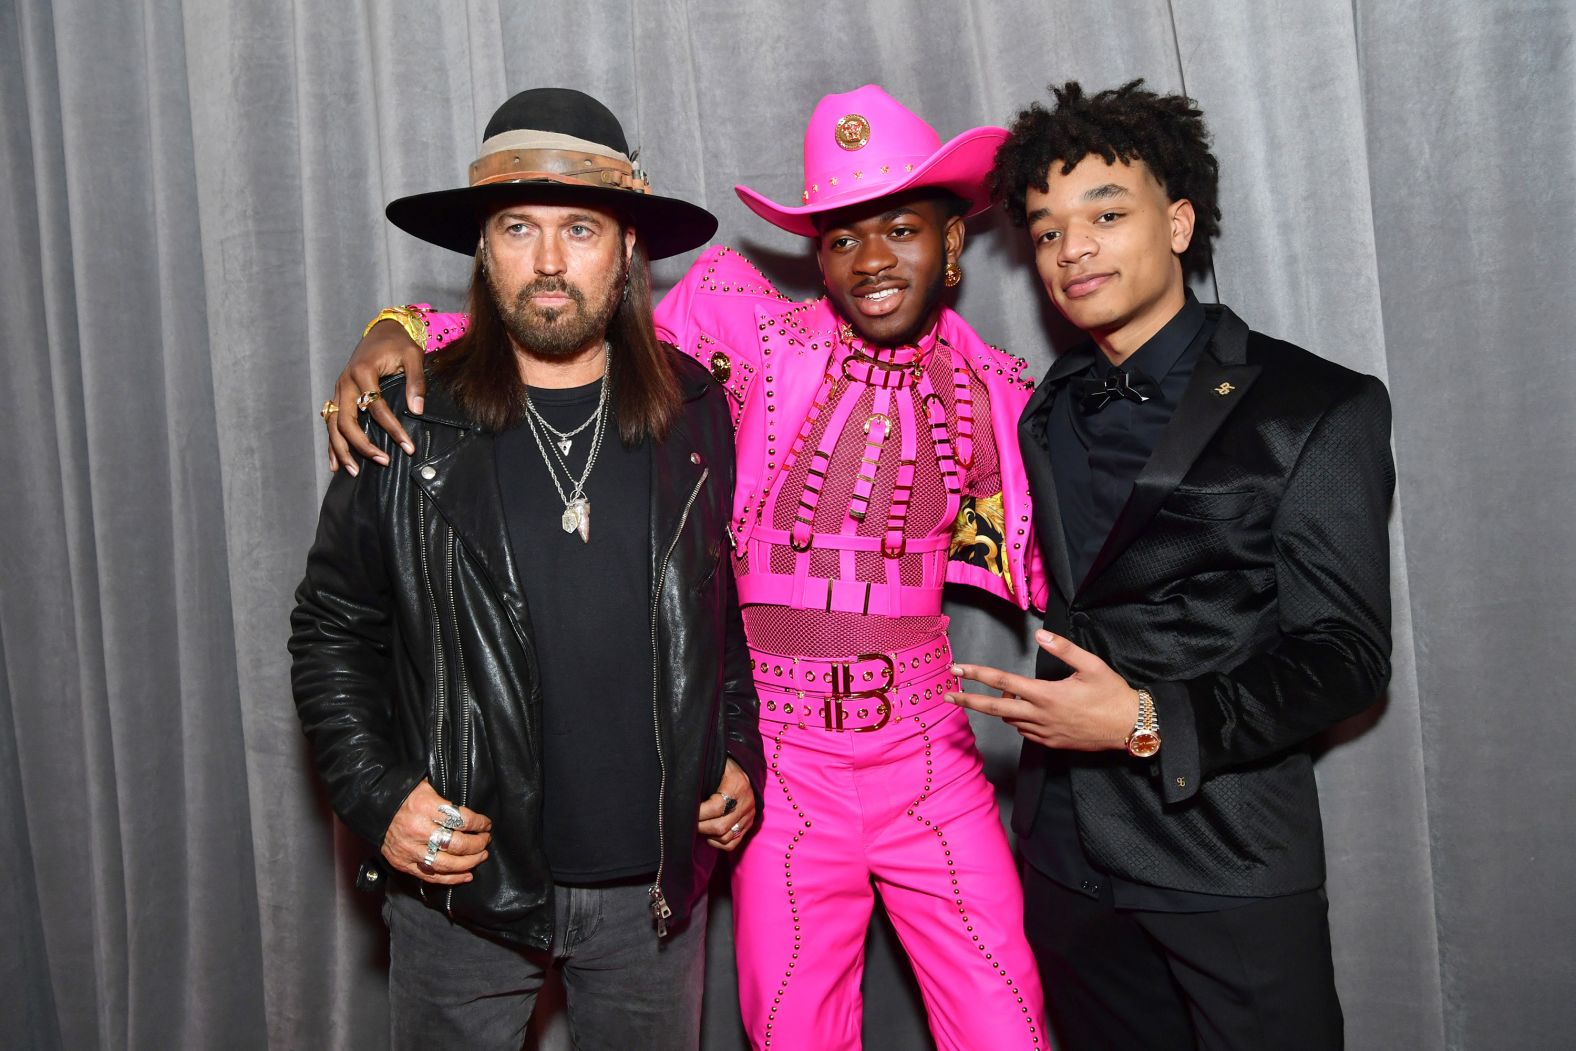 Billy Ray Cyrus, Lil Nas X, and YoungKio